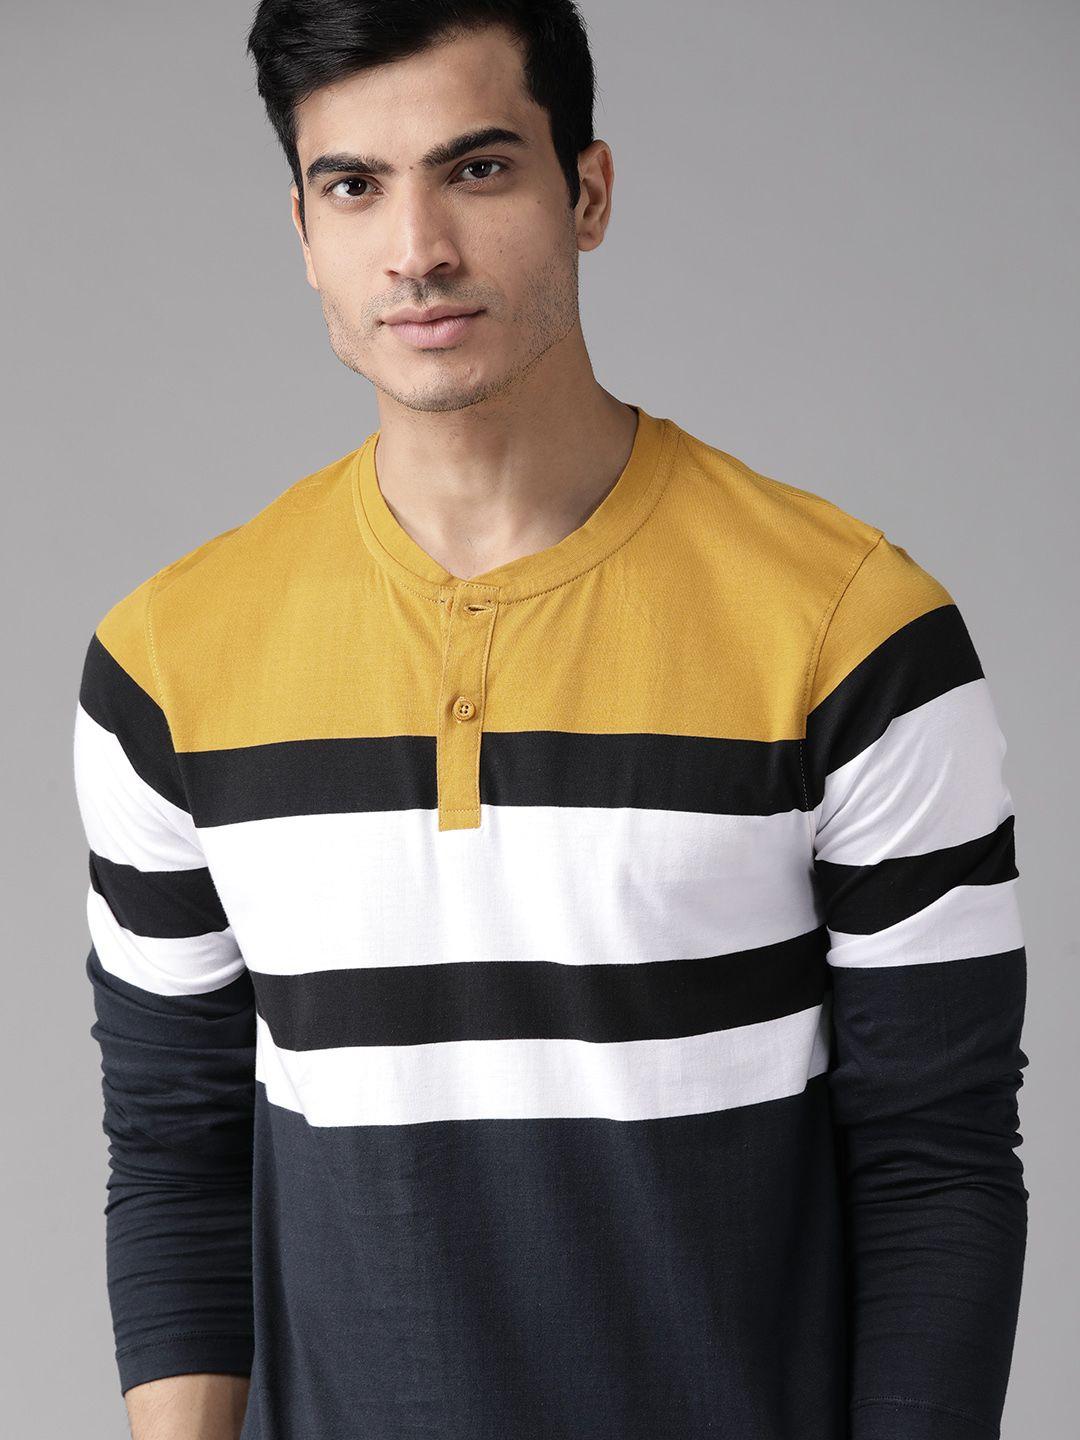 the roadster lifestyle co men navy blue & white striped henley neck t-shirt